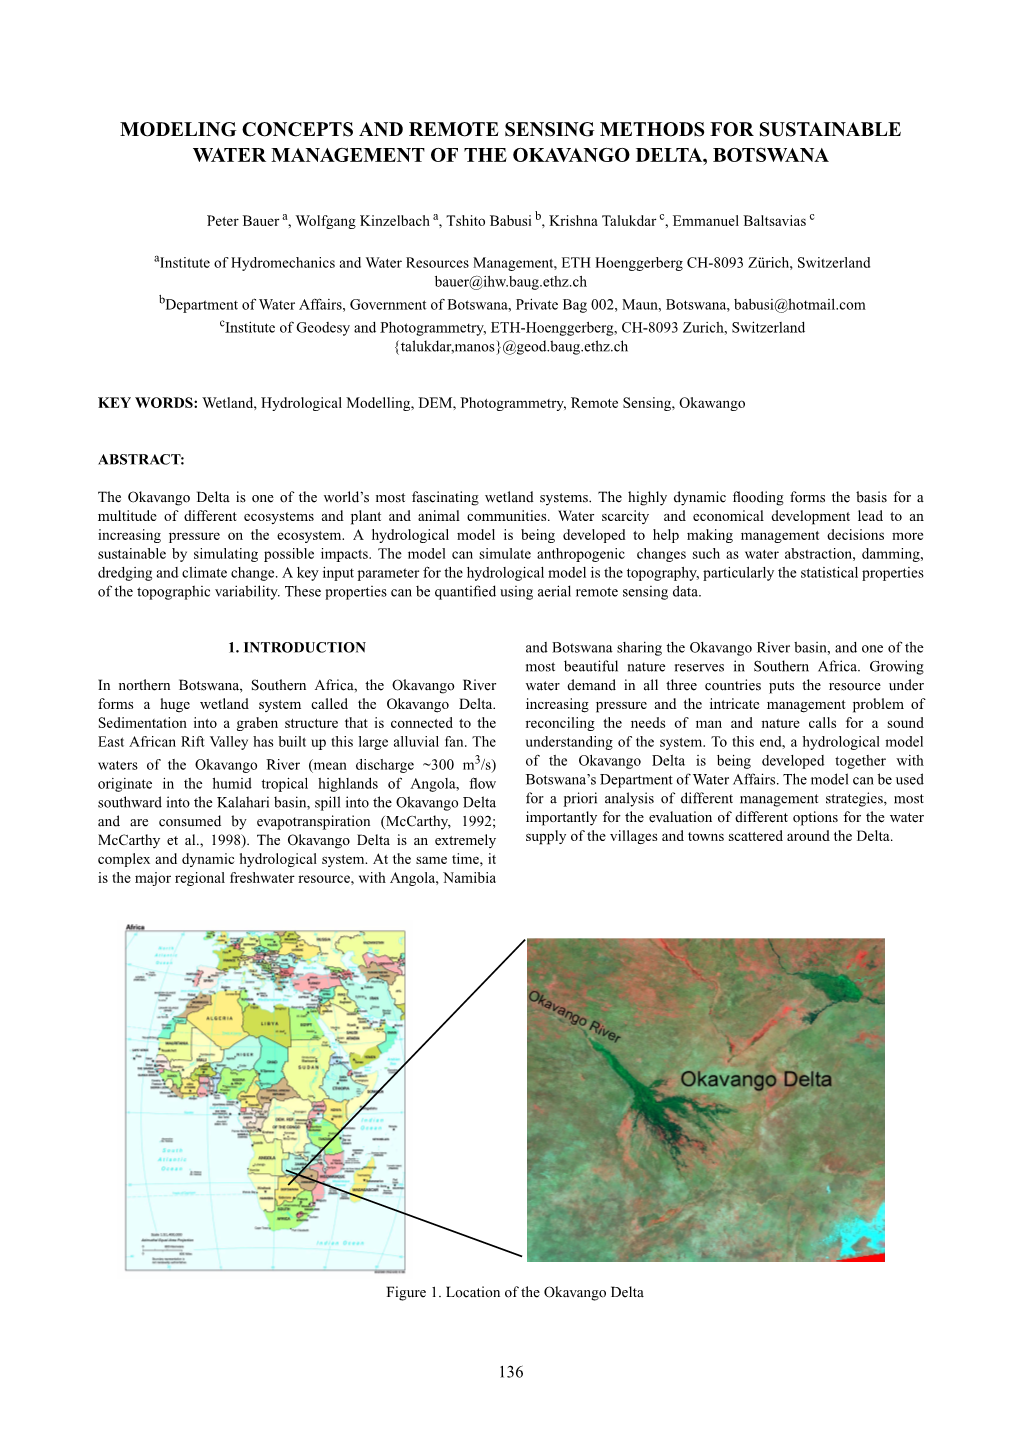 Modeling Concepts and Remote Sensing Methods for Sustainable Water Management of the Okavango Delta, Botswana